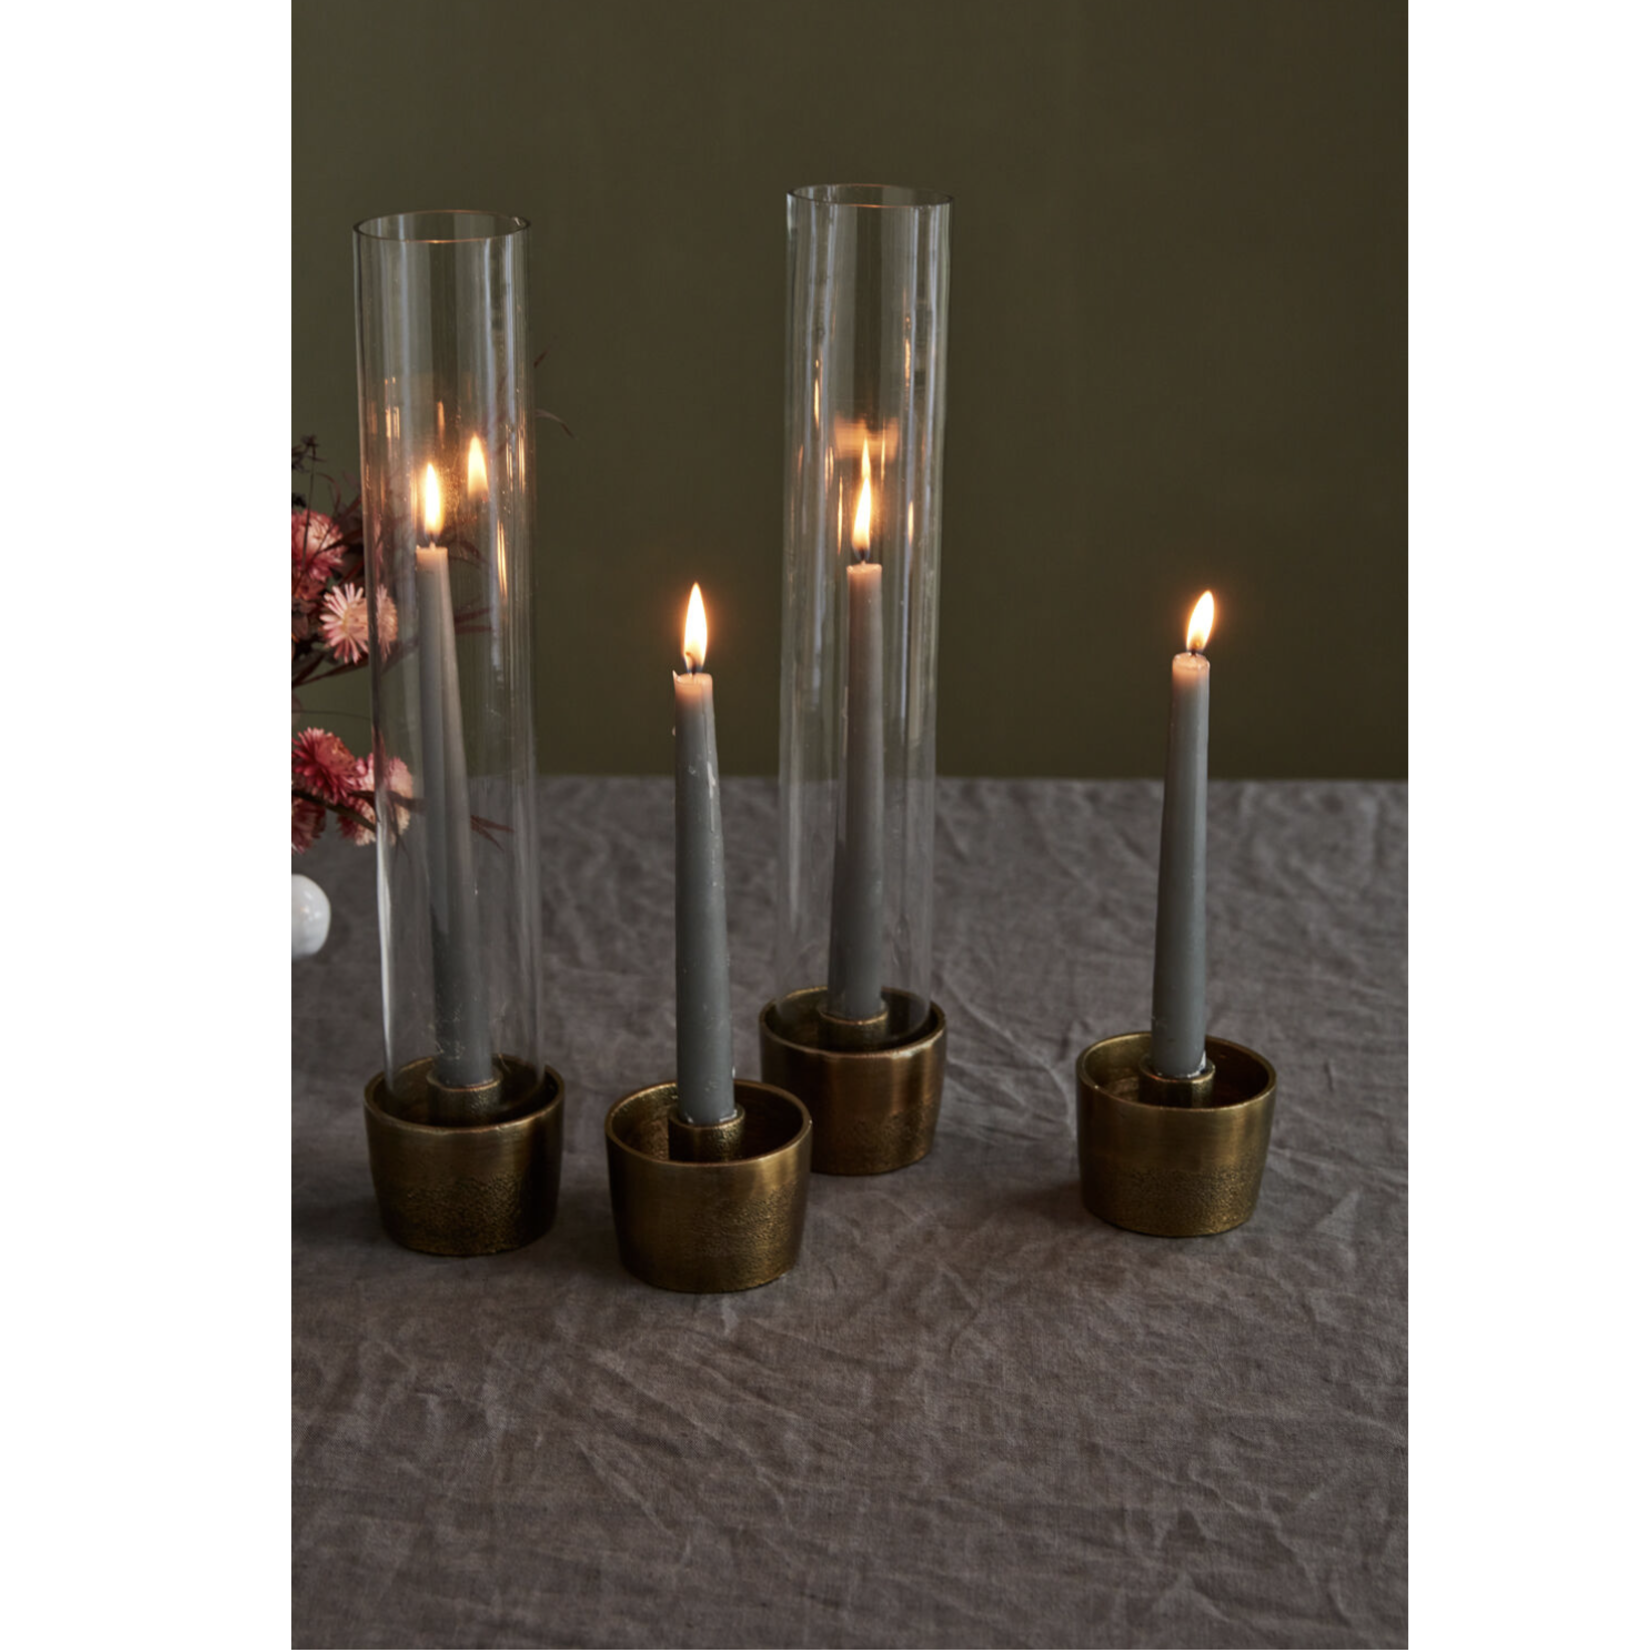 2”H X 2.75” ANTIQUE GOLD METAL HARMONY CANDLEHOLDER - SET OF 4 (CHIMNEY NOT INCLUDED)